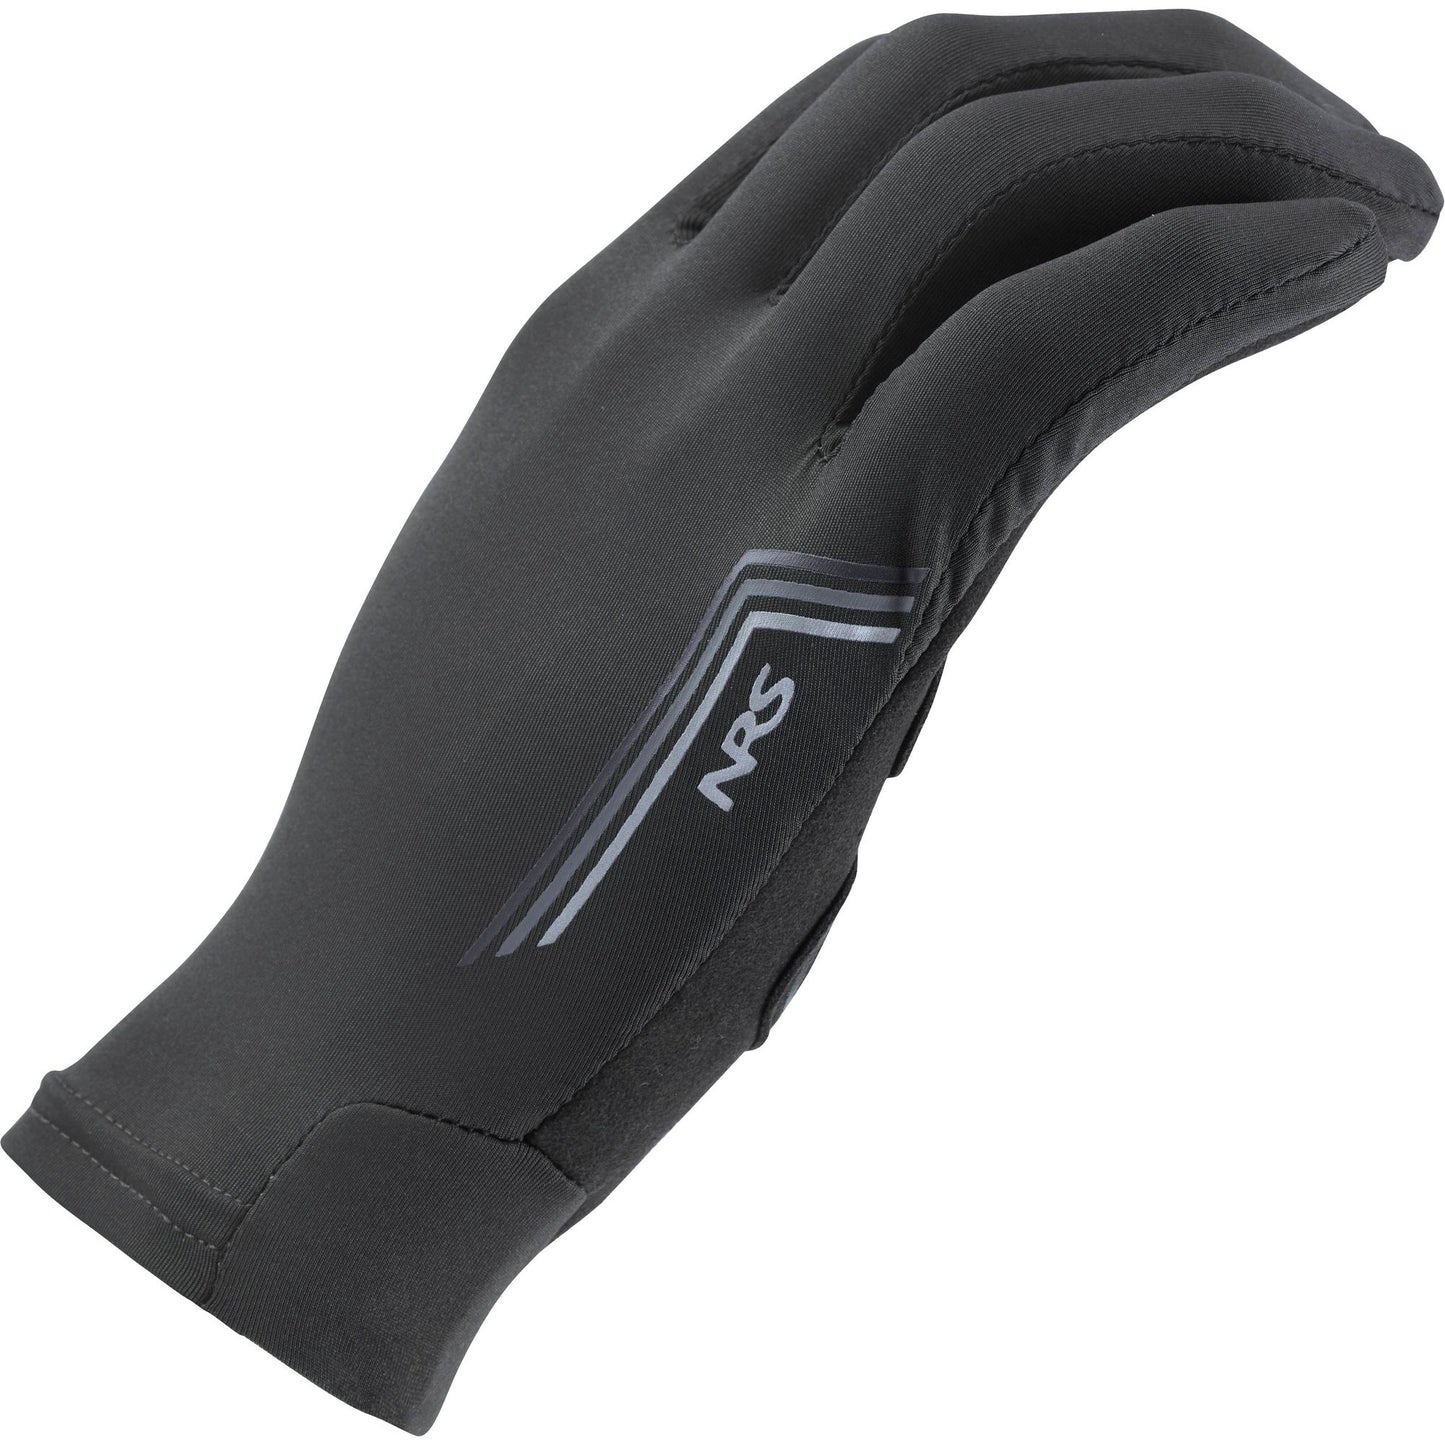 Replace with: Black NRS Cove Gloves featuring a silver logo and synthetic leather palm for added sun protection.